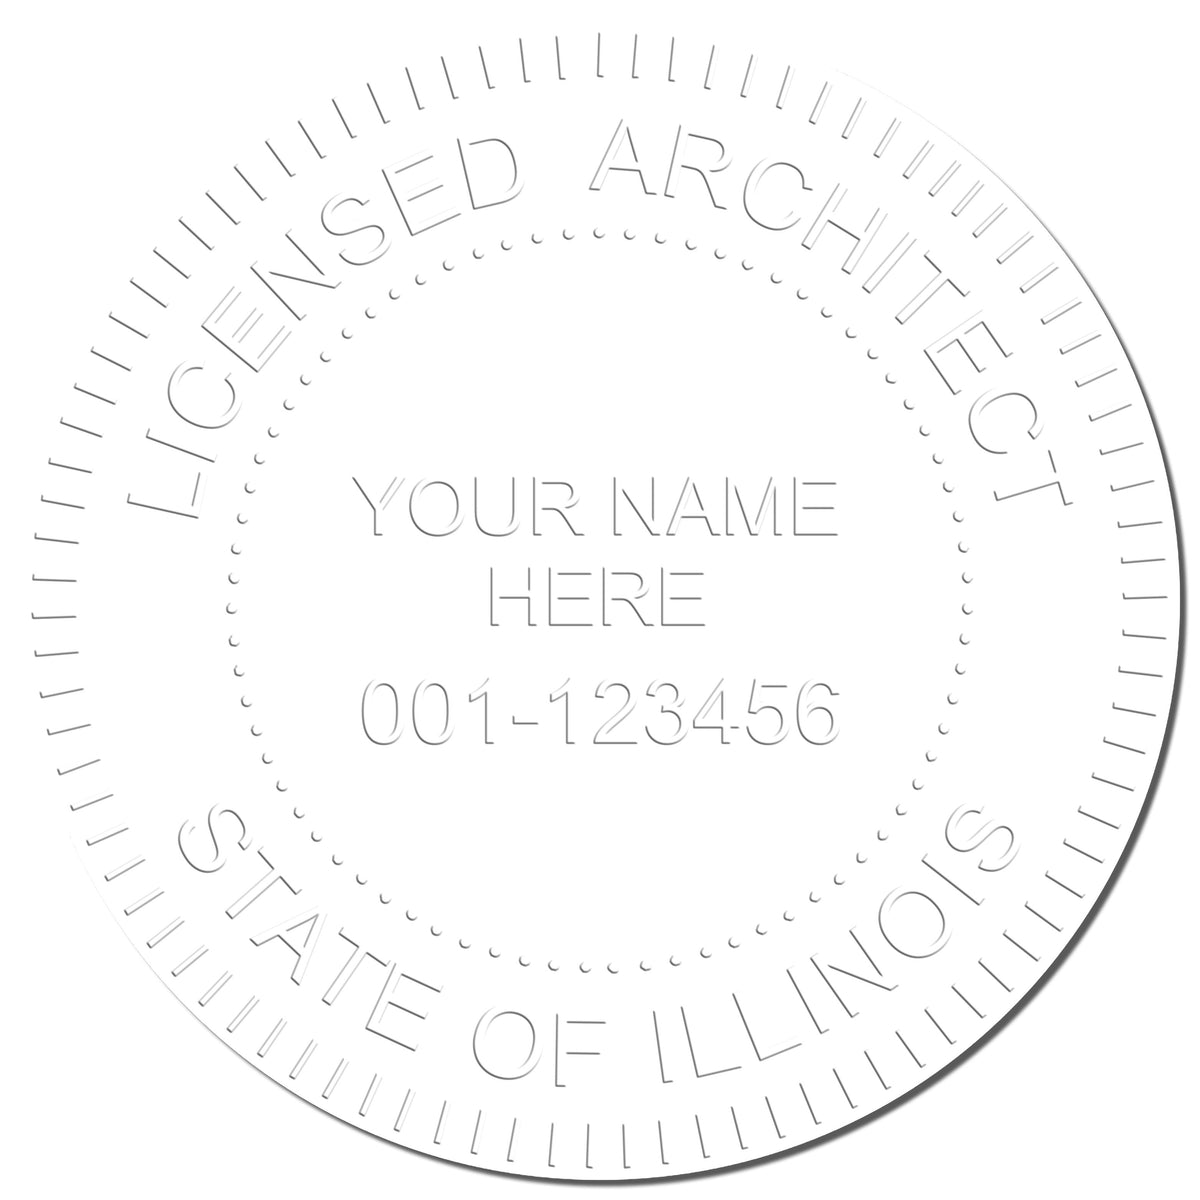 A photograph of the Illinois Desk Architect Embossing Seal stamp impression reveals a vivid, professional image of the on paper.